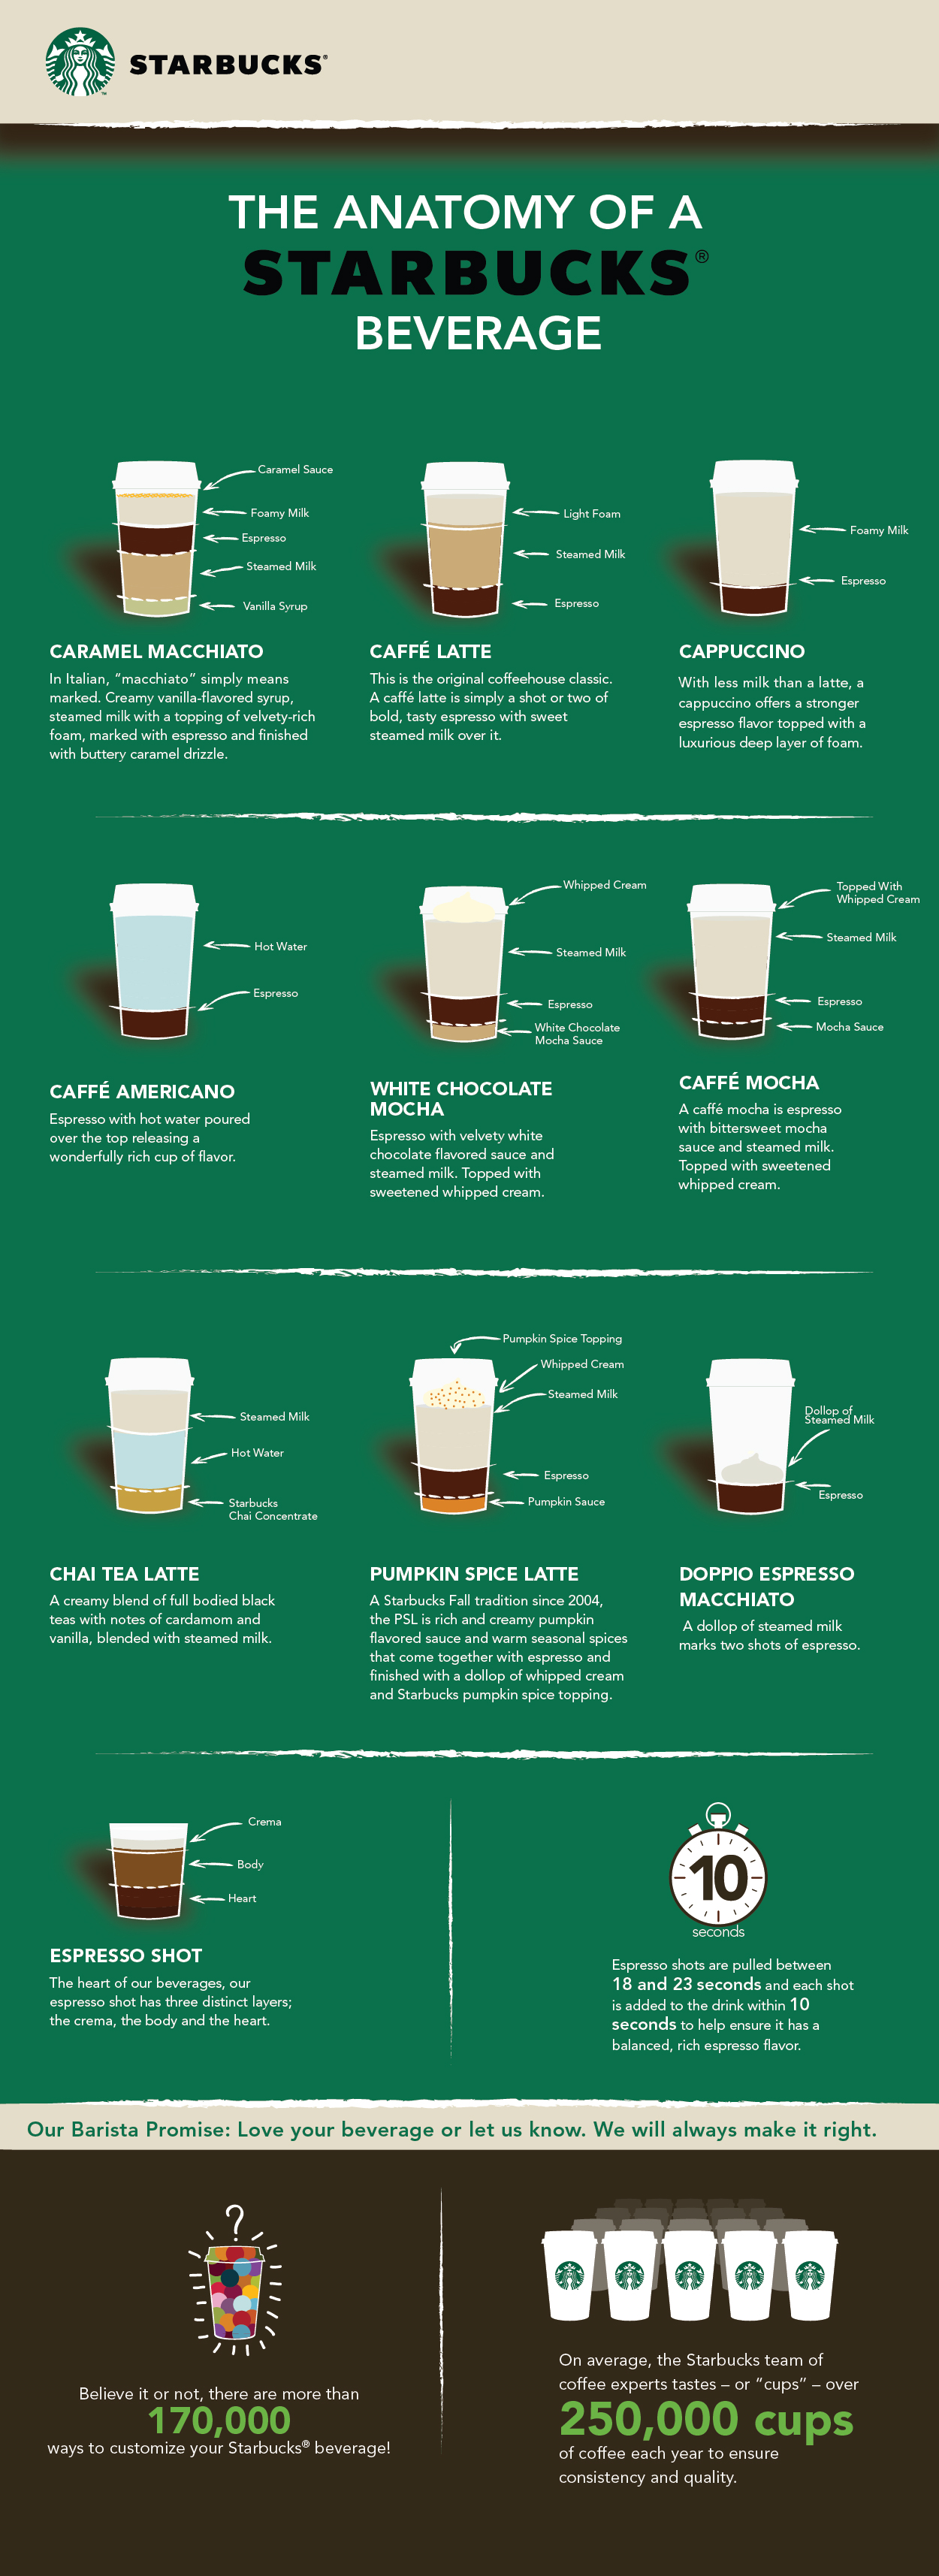 How To Make Starbucks Coffee Recipes at Home For Cheap